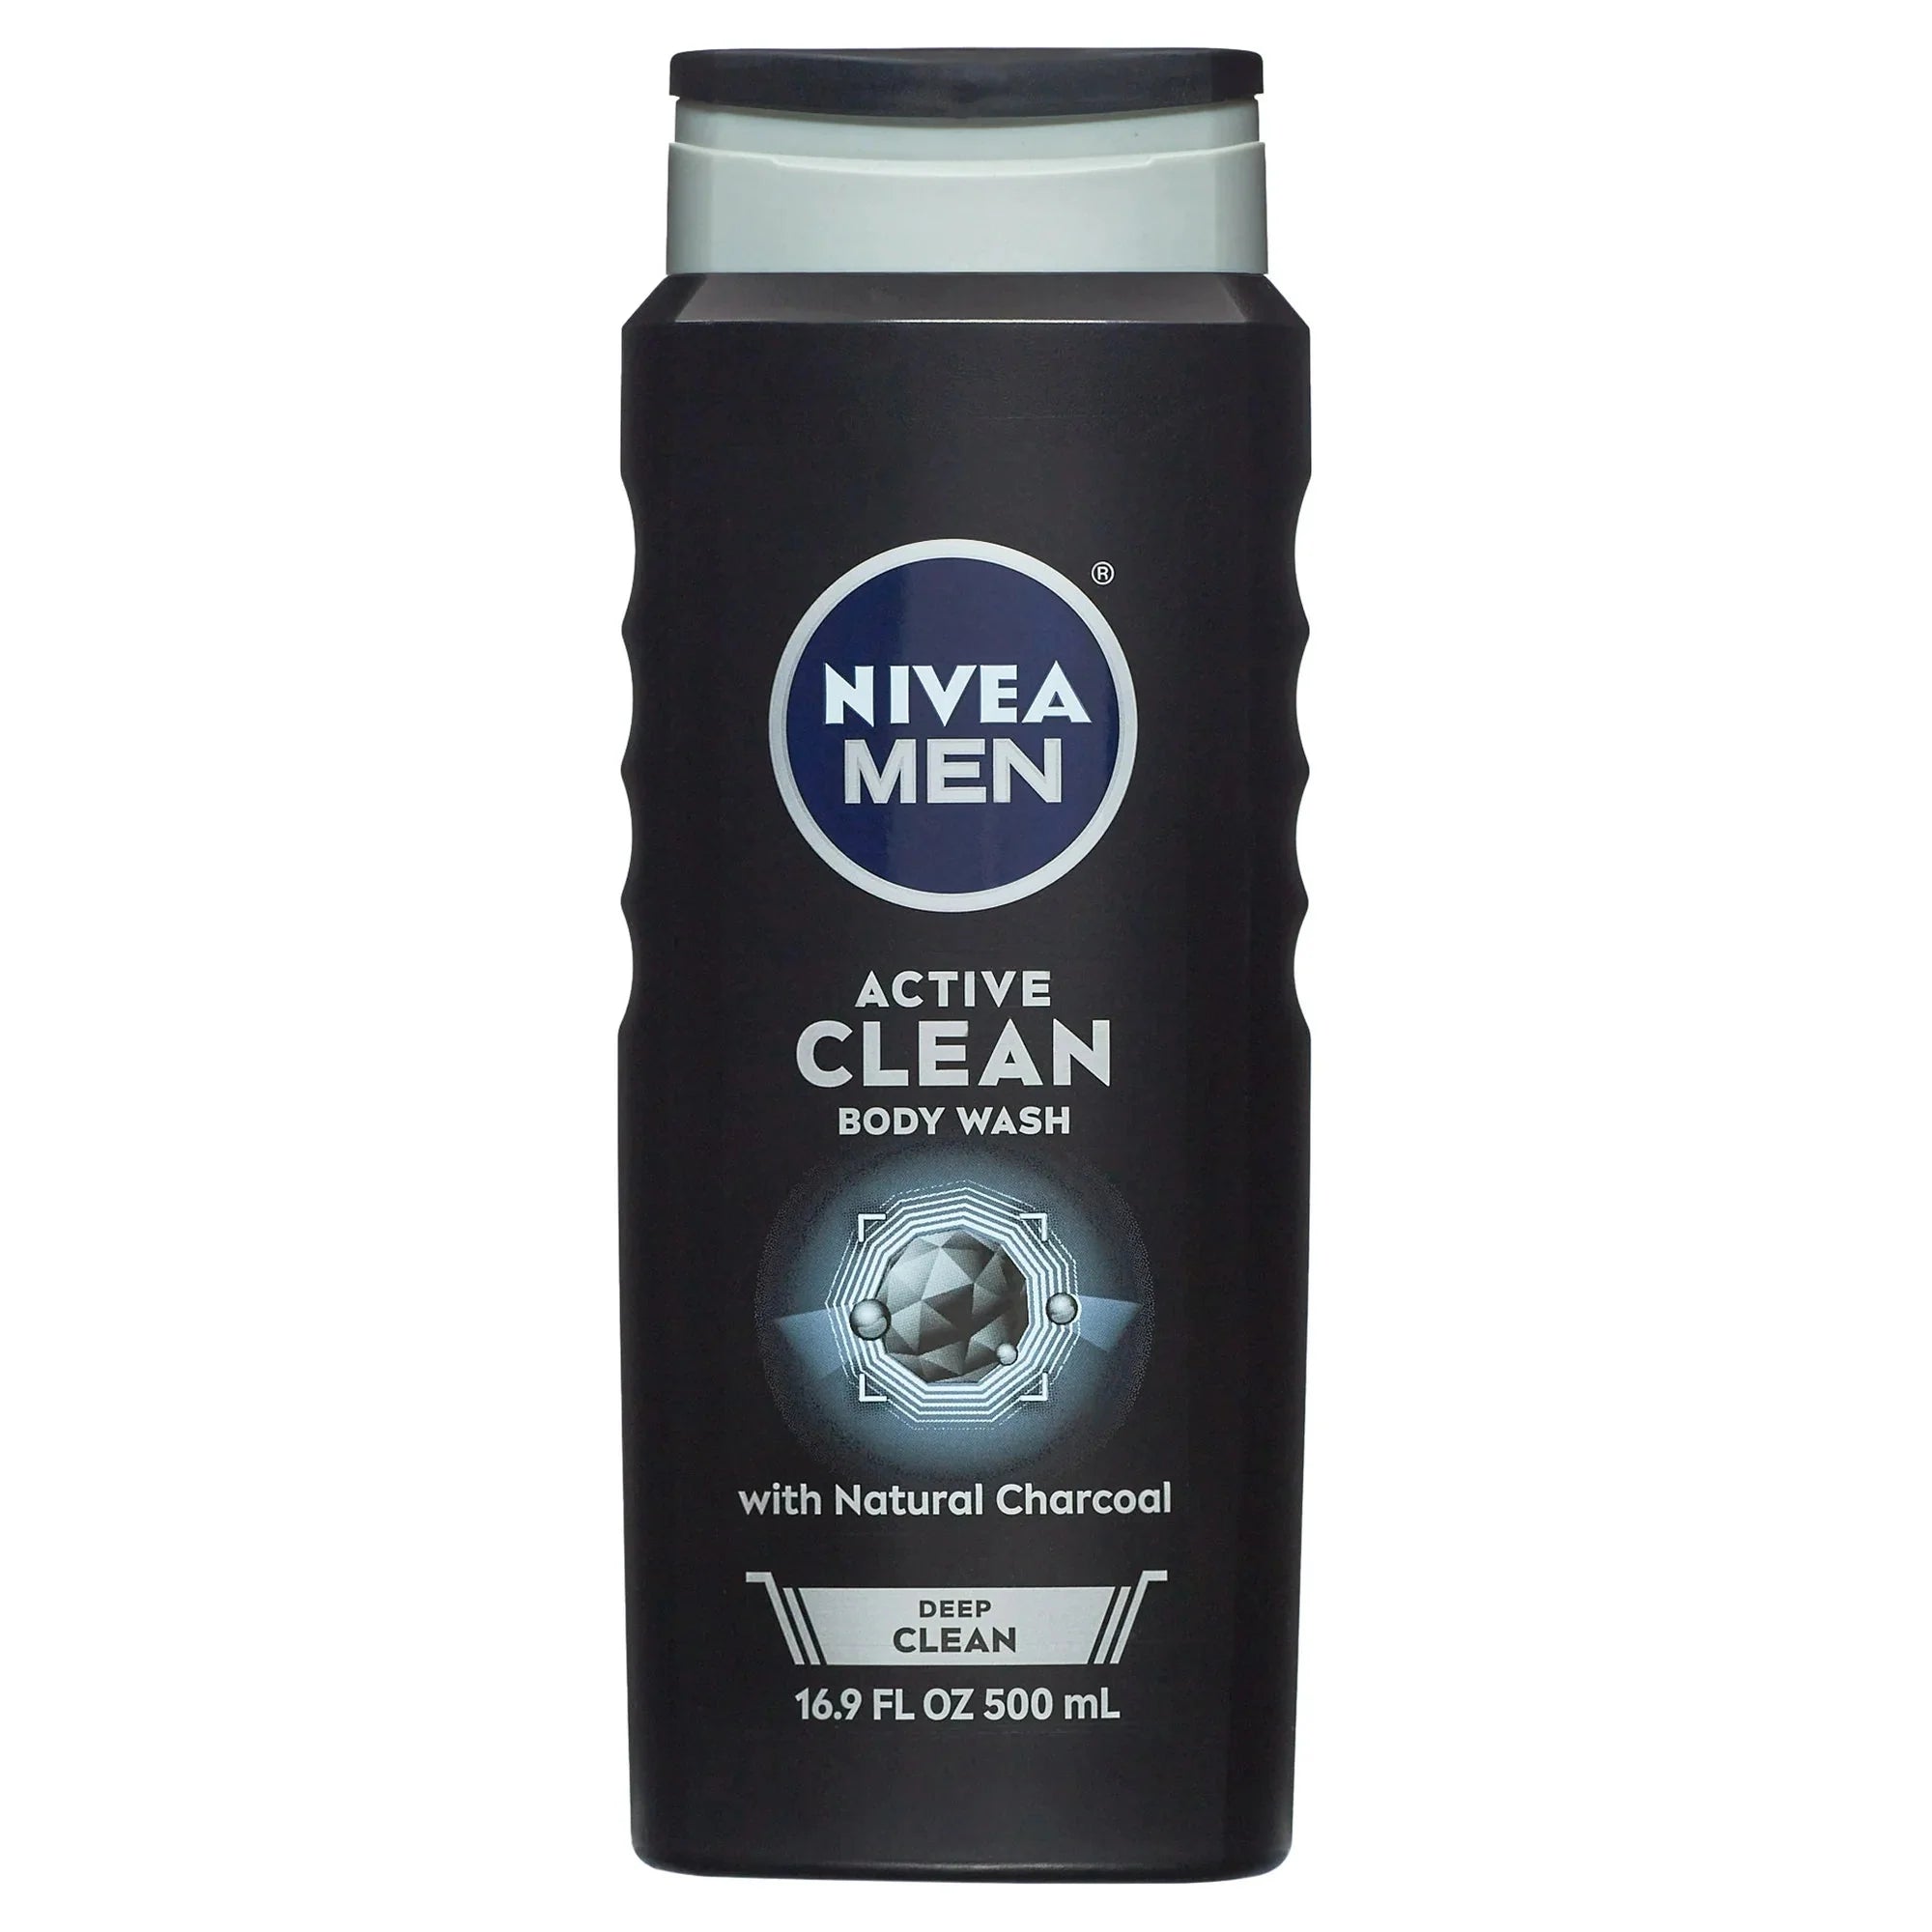 Wholesale prices with free shipping all over United States NIVEA MEN DEEP Active Clean Charcoal Body Wash, 16.9 Fl Oz Bottle - Steven Deals